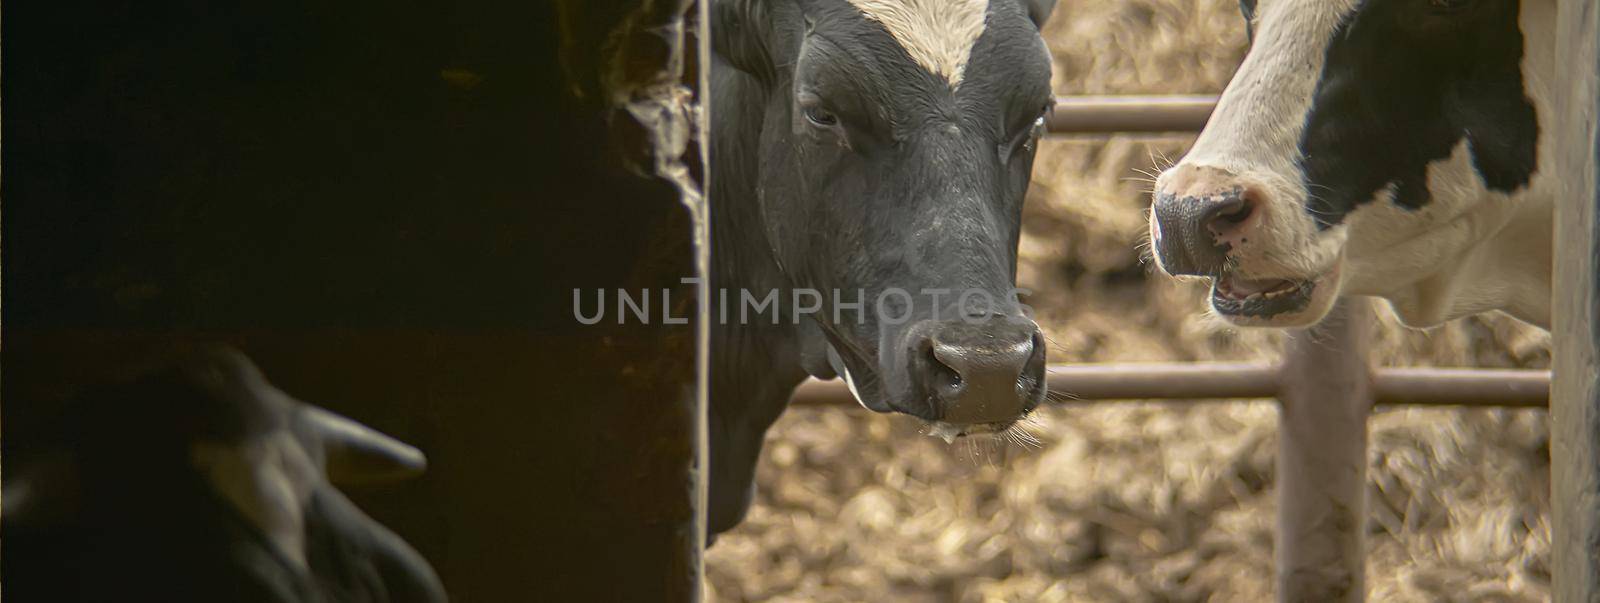 Cows breeding detail, banner image with copy space